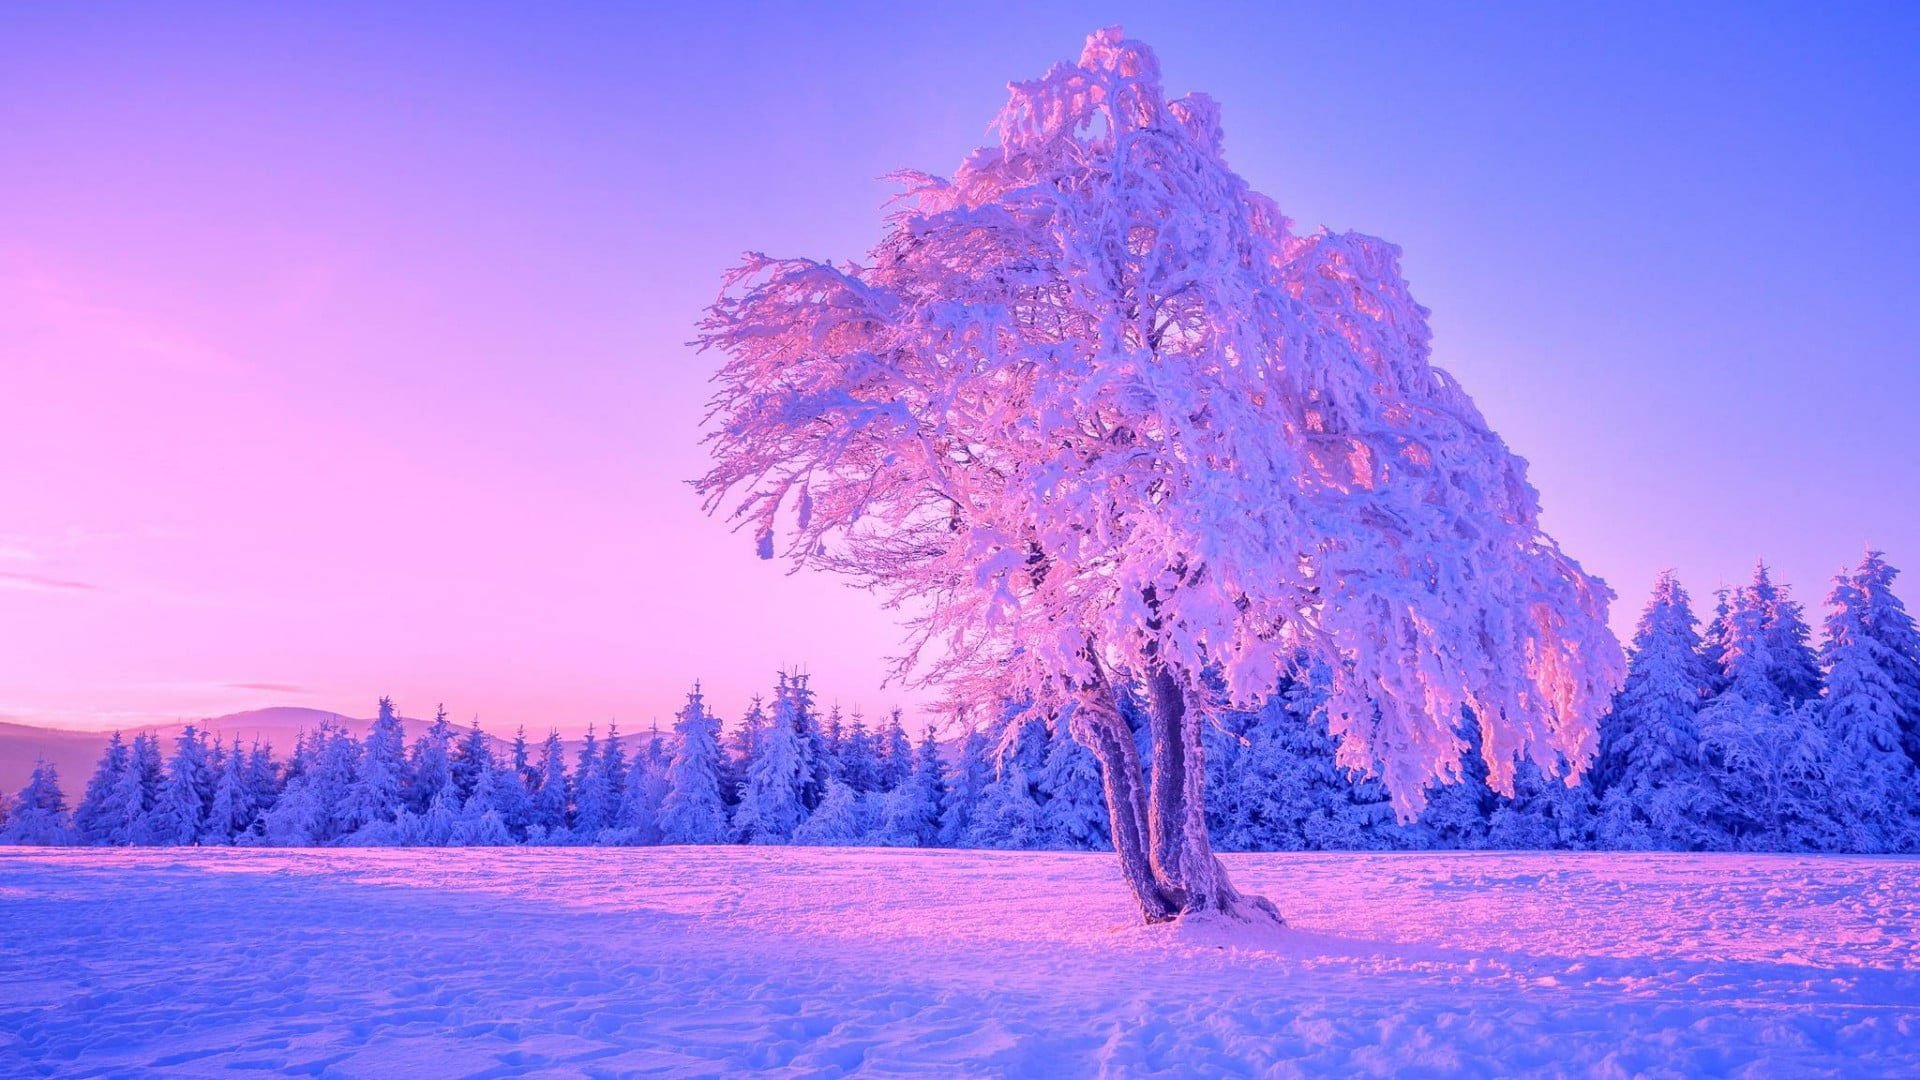 Lone tree wallpaper, winter, sky, nature, freezing, snow, purple sky • Wallpapers For You HD Wallpapers For Desktop & Mobile